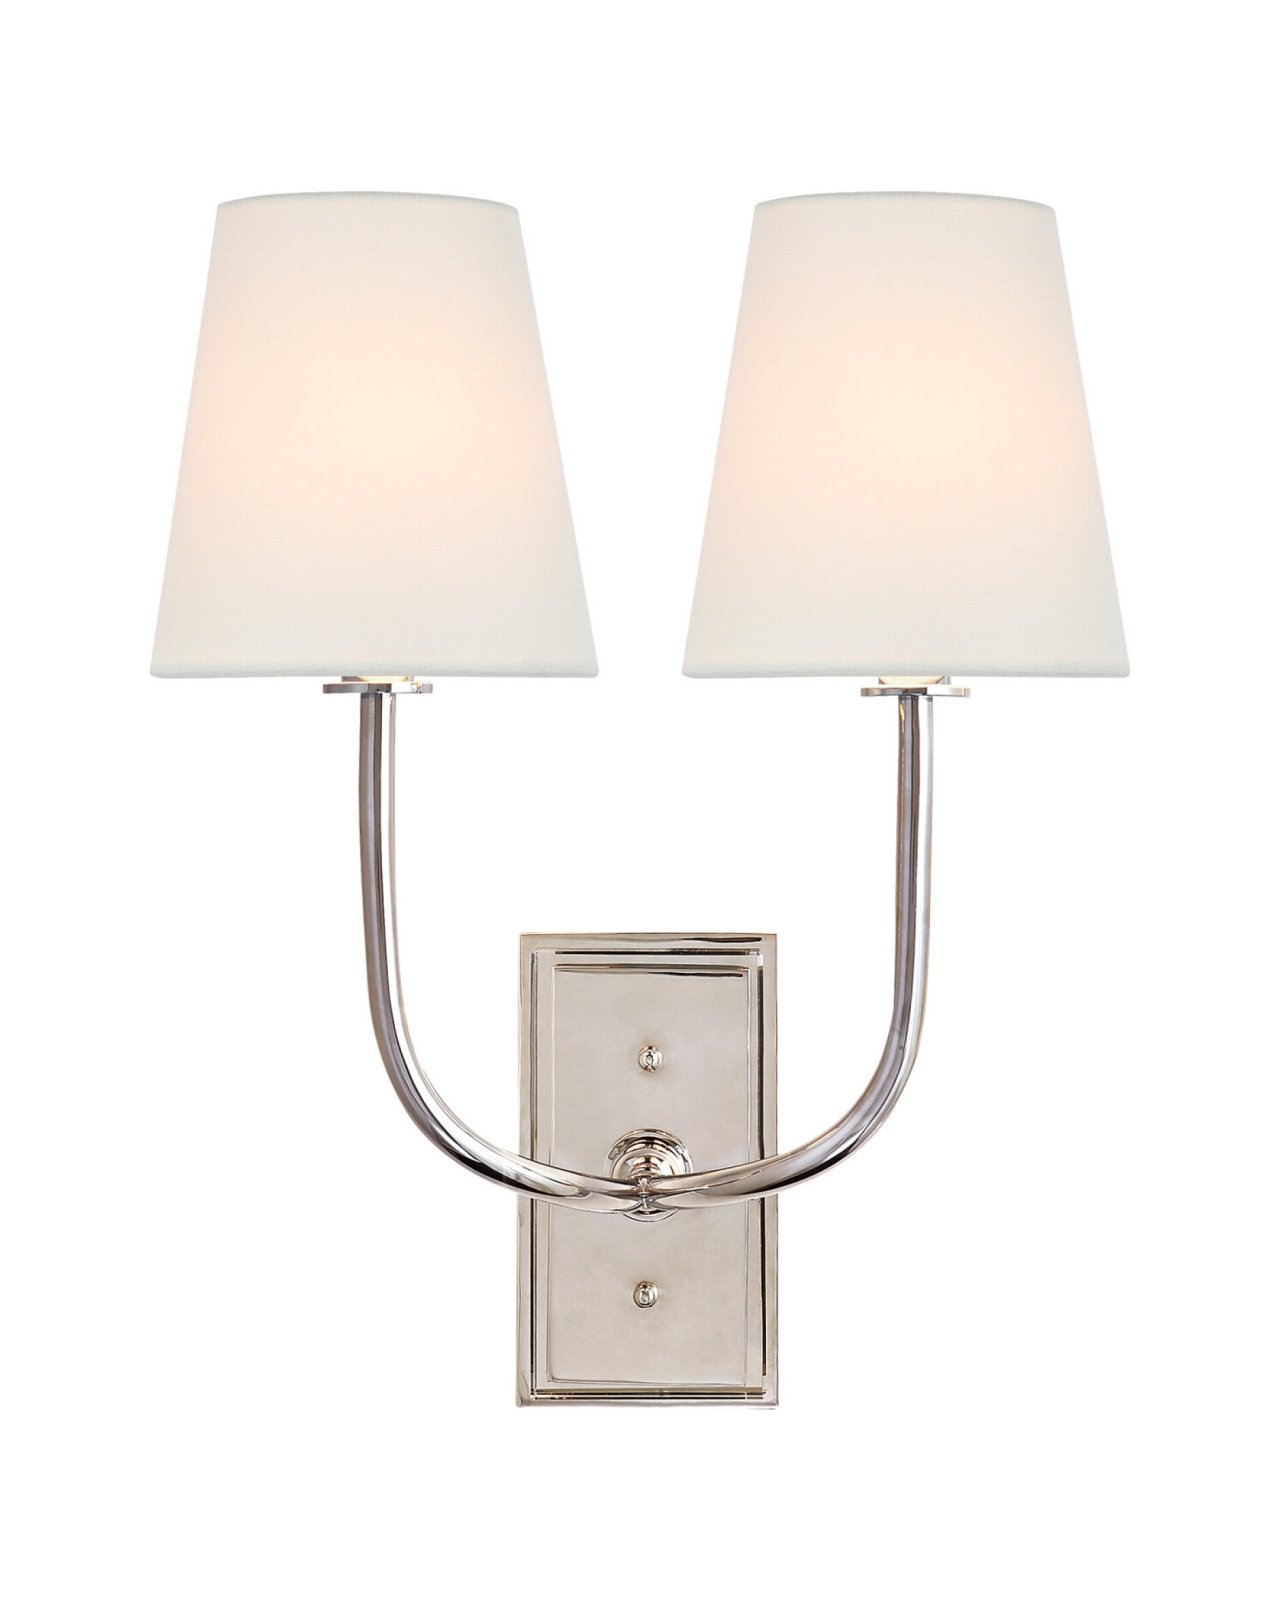 Hulton Double Sconce Polished Nickel/Linen